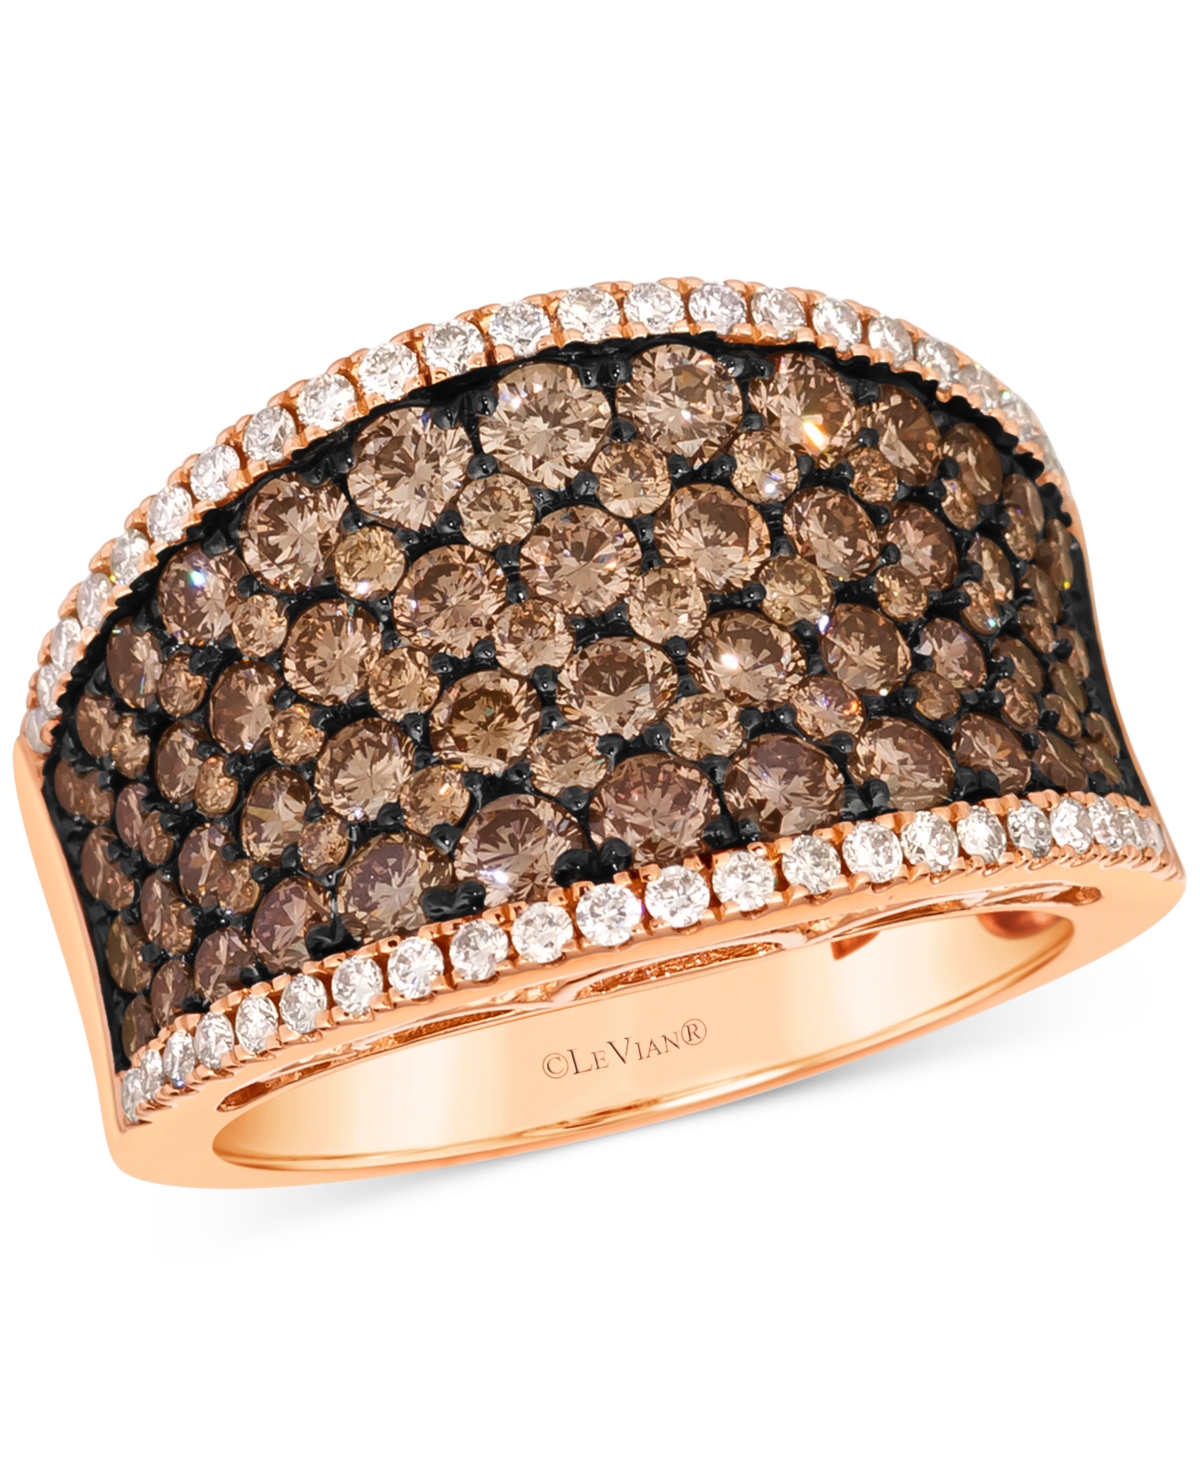 Le Vian Chocolate Diamond & Nude Diamond Concave Ring (3 Ct. T.w.) In 14k Rose Gold In K Strawberry Gold Ring